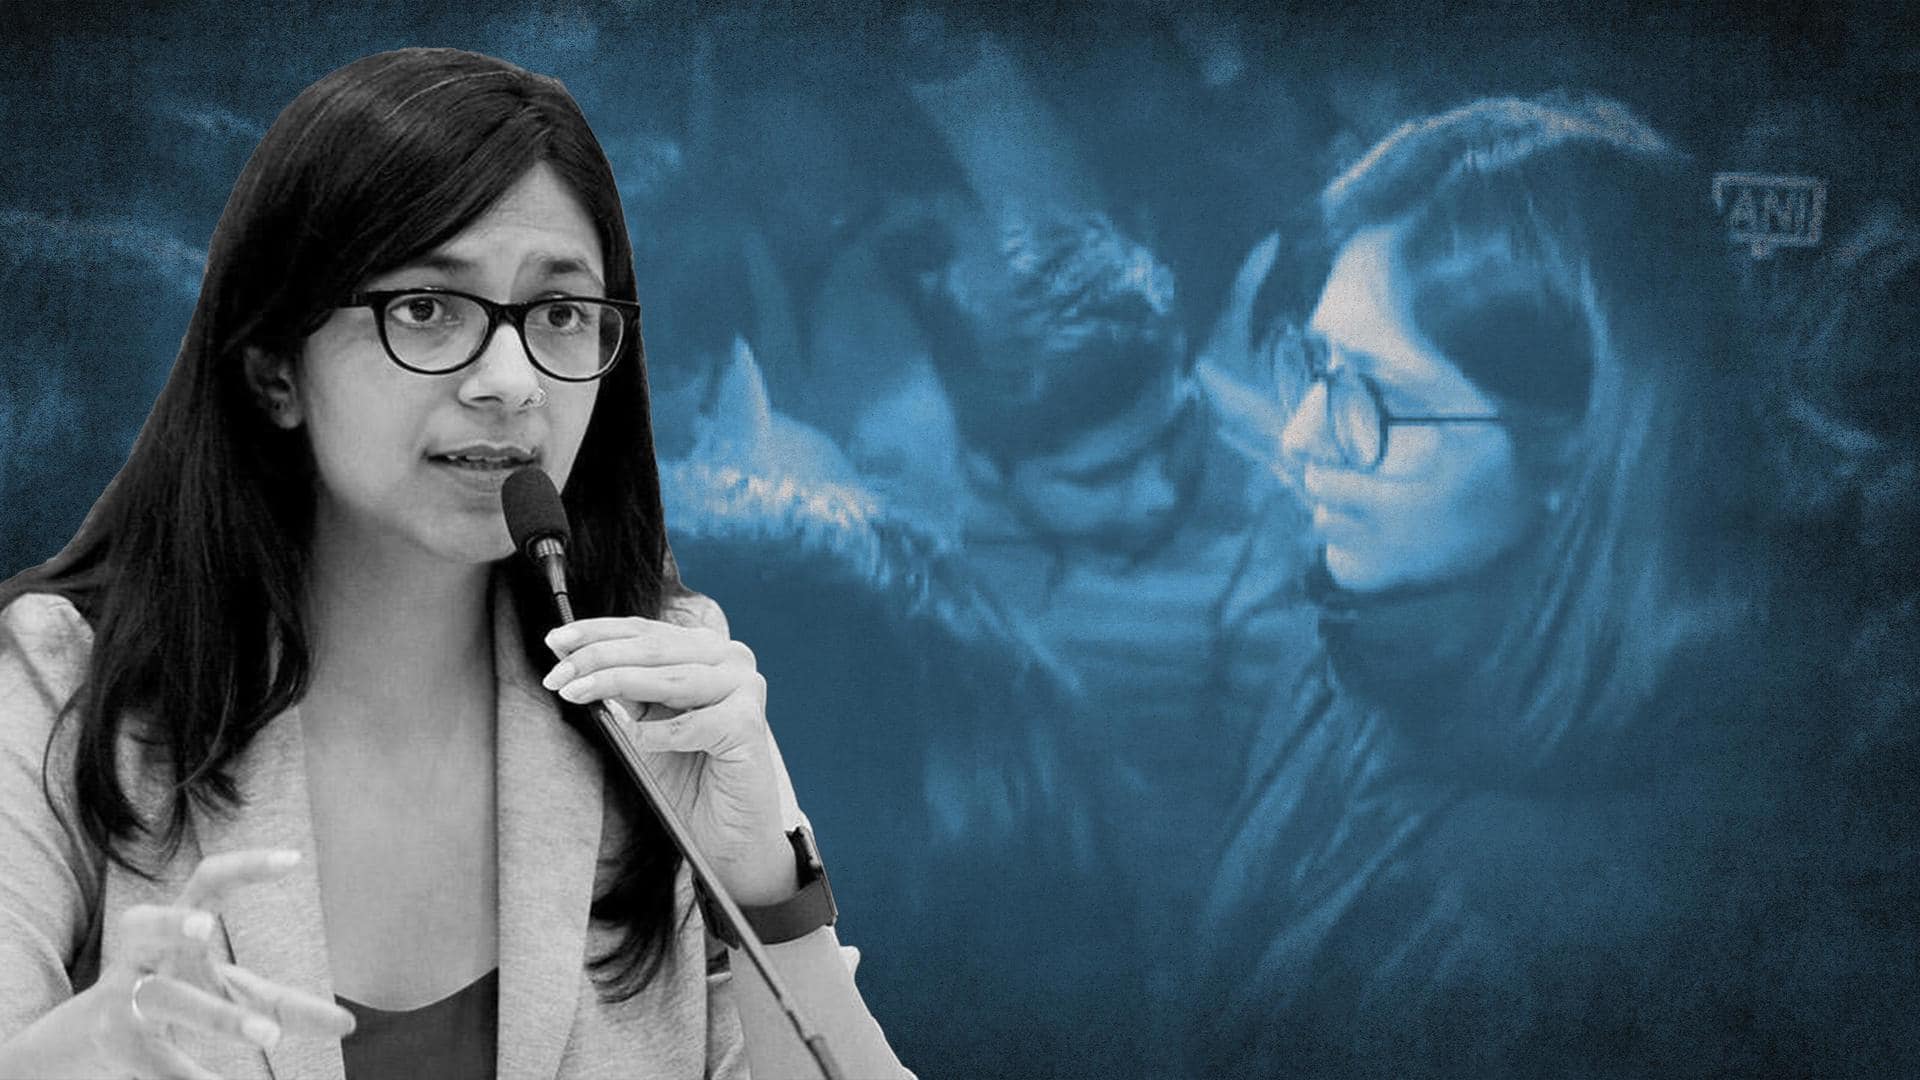 DCW chief Swati Maliwal allegedly molested, dragged by drunk driver